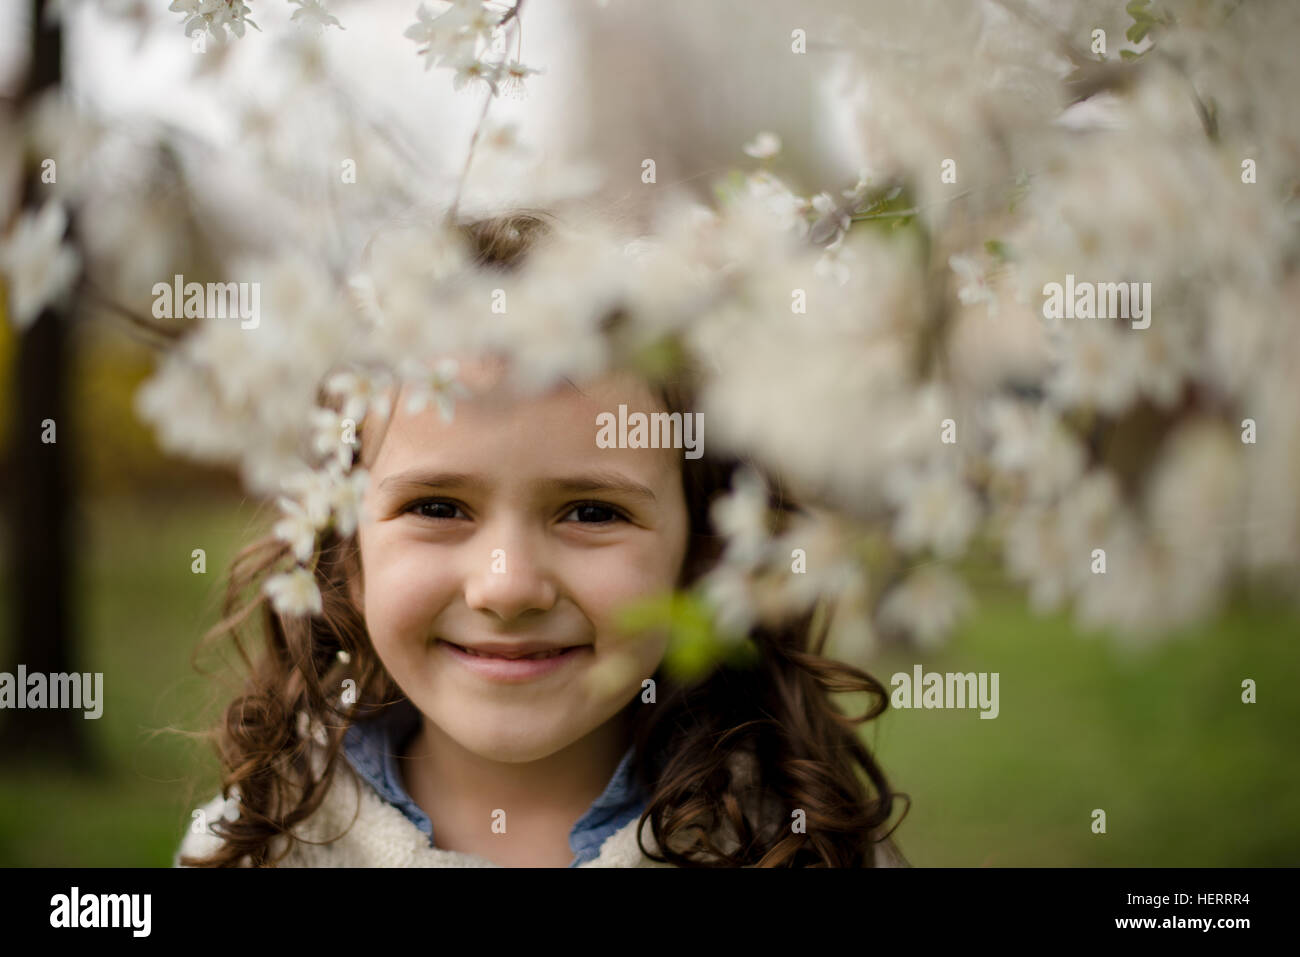 Portrait of a girl standing by apple blossom tree Stock Photo